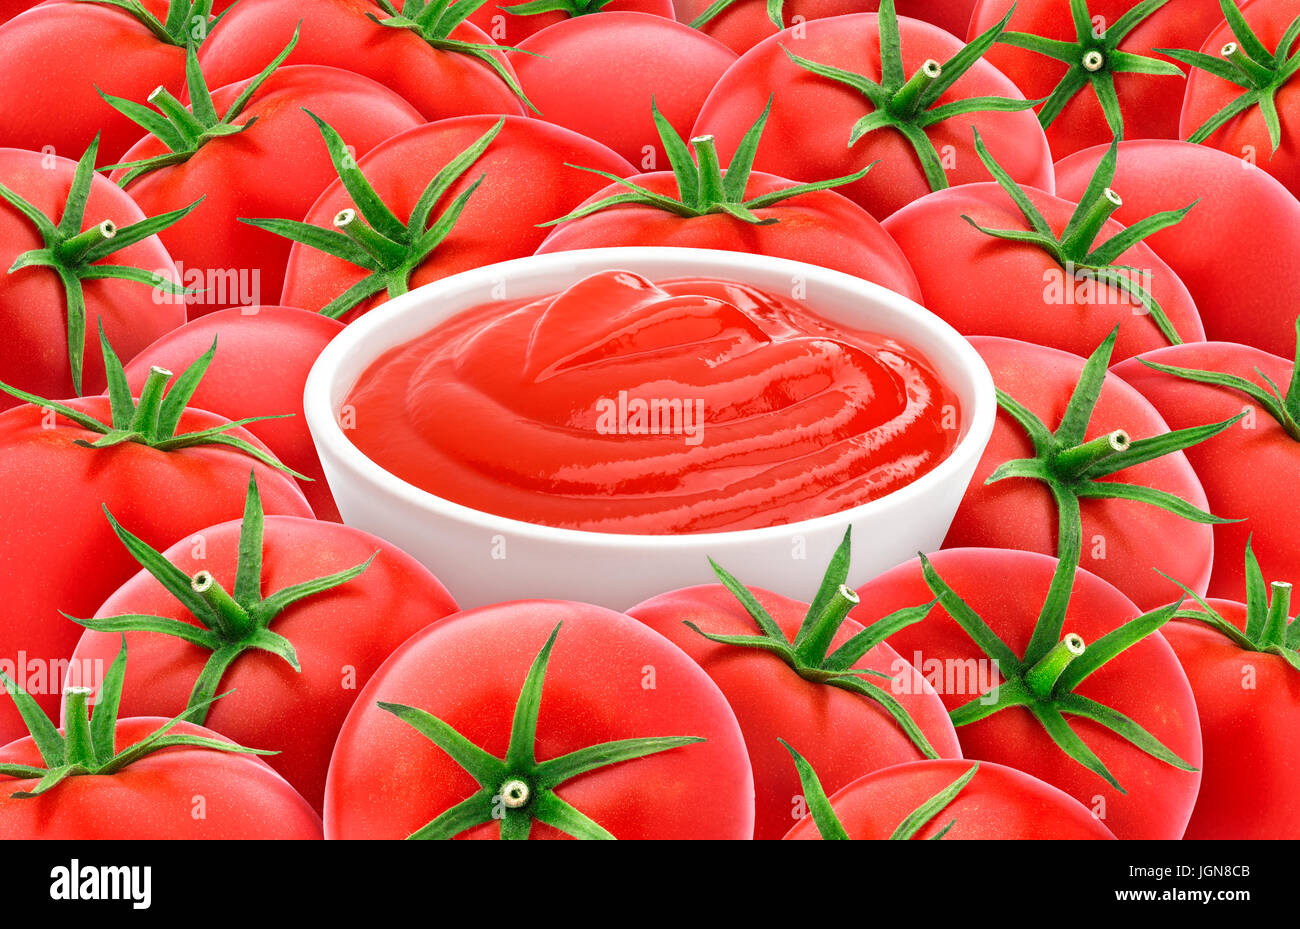 Tomato ketchup on tomatoes background. Red tomato texture. Stock Photo